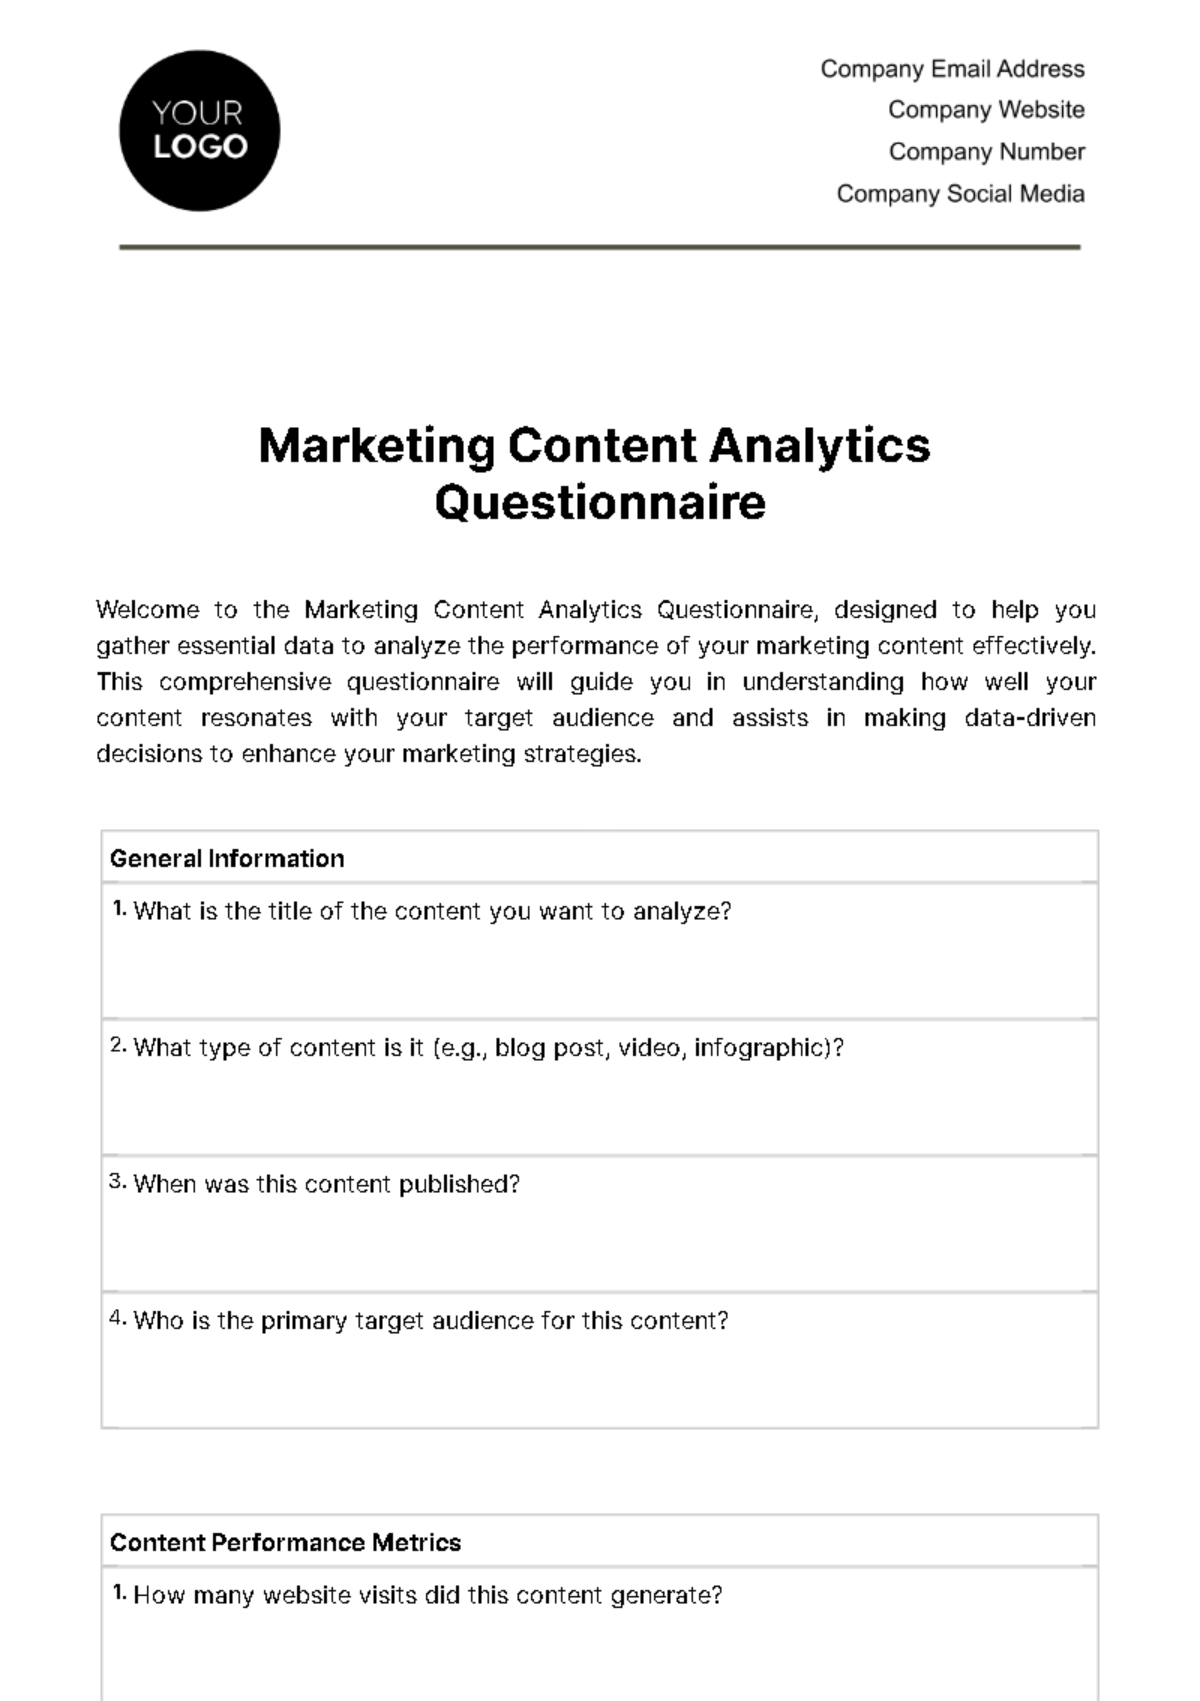 Free Marketing Content Analytics Questionnaire Template